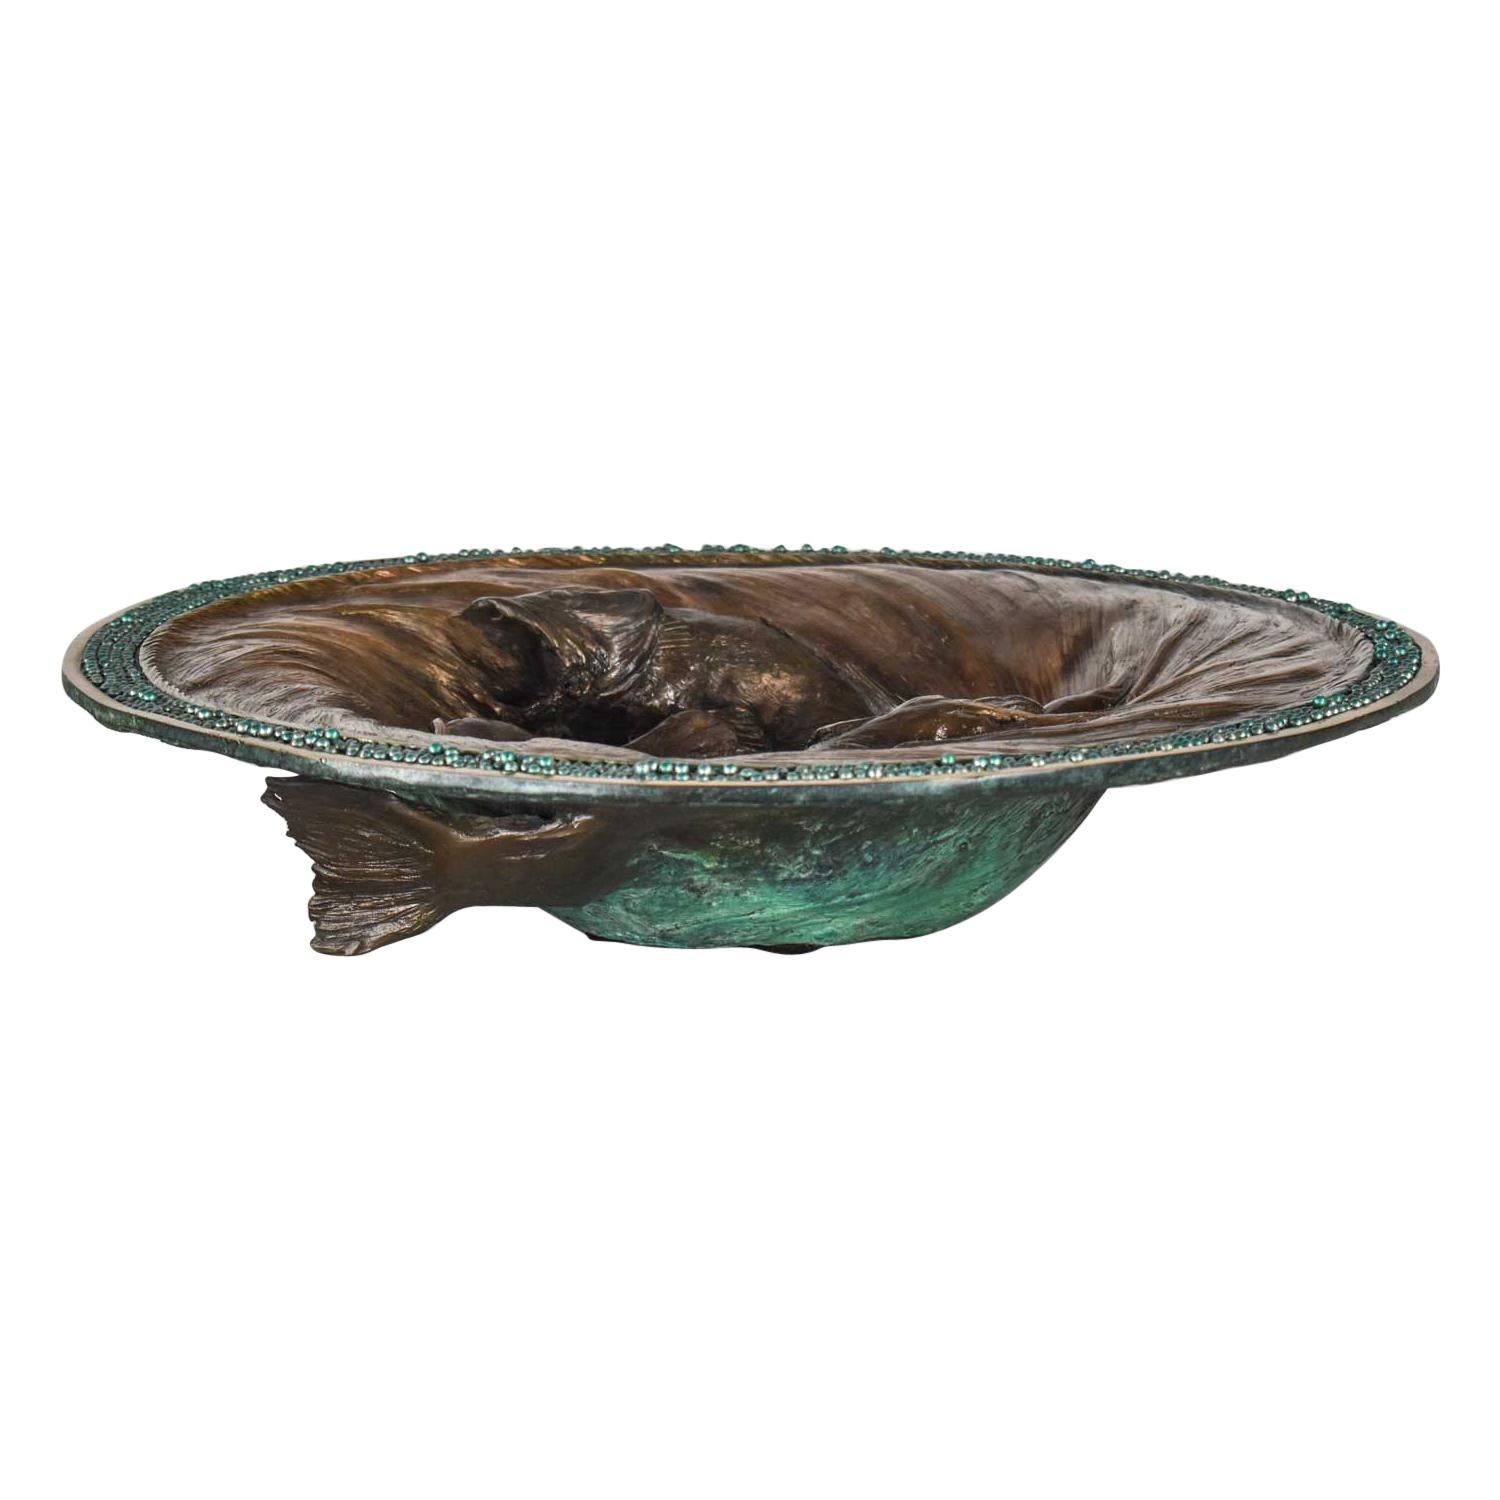 Organic Modern Cast Bronze Bowl Sculpture with Fish Design by John Forsythe For Sale